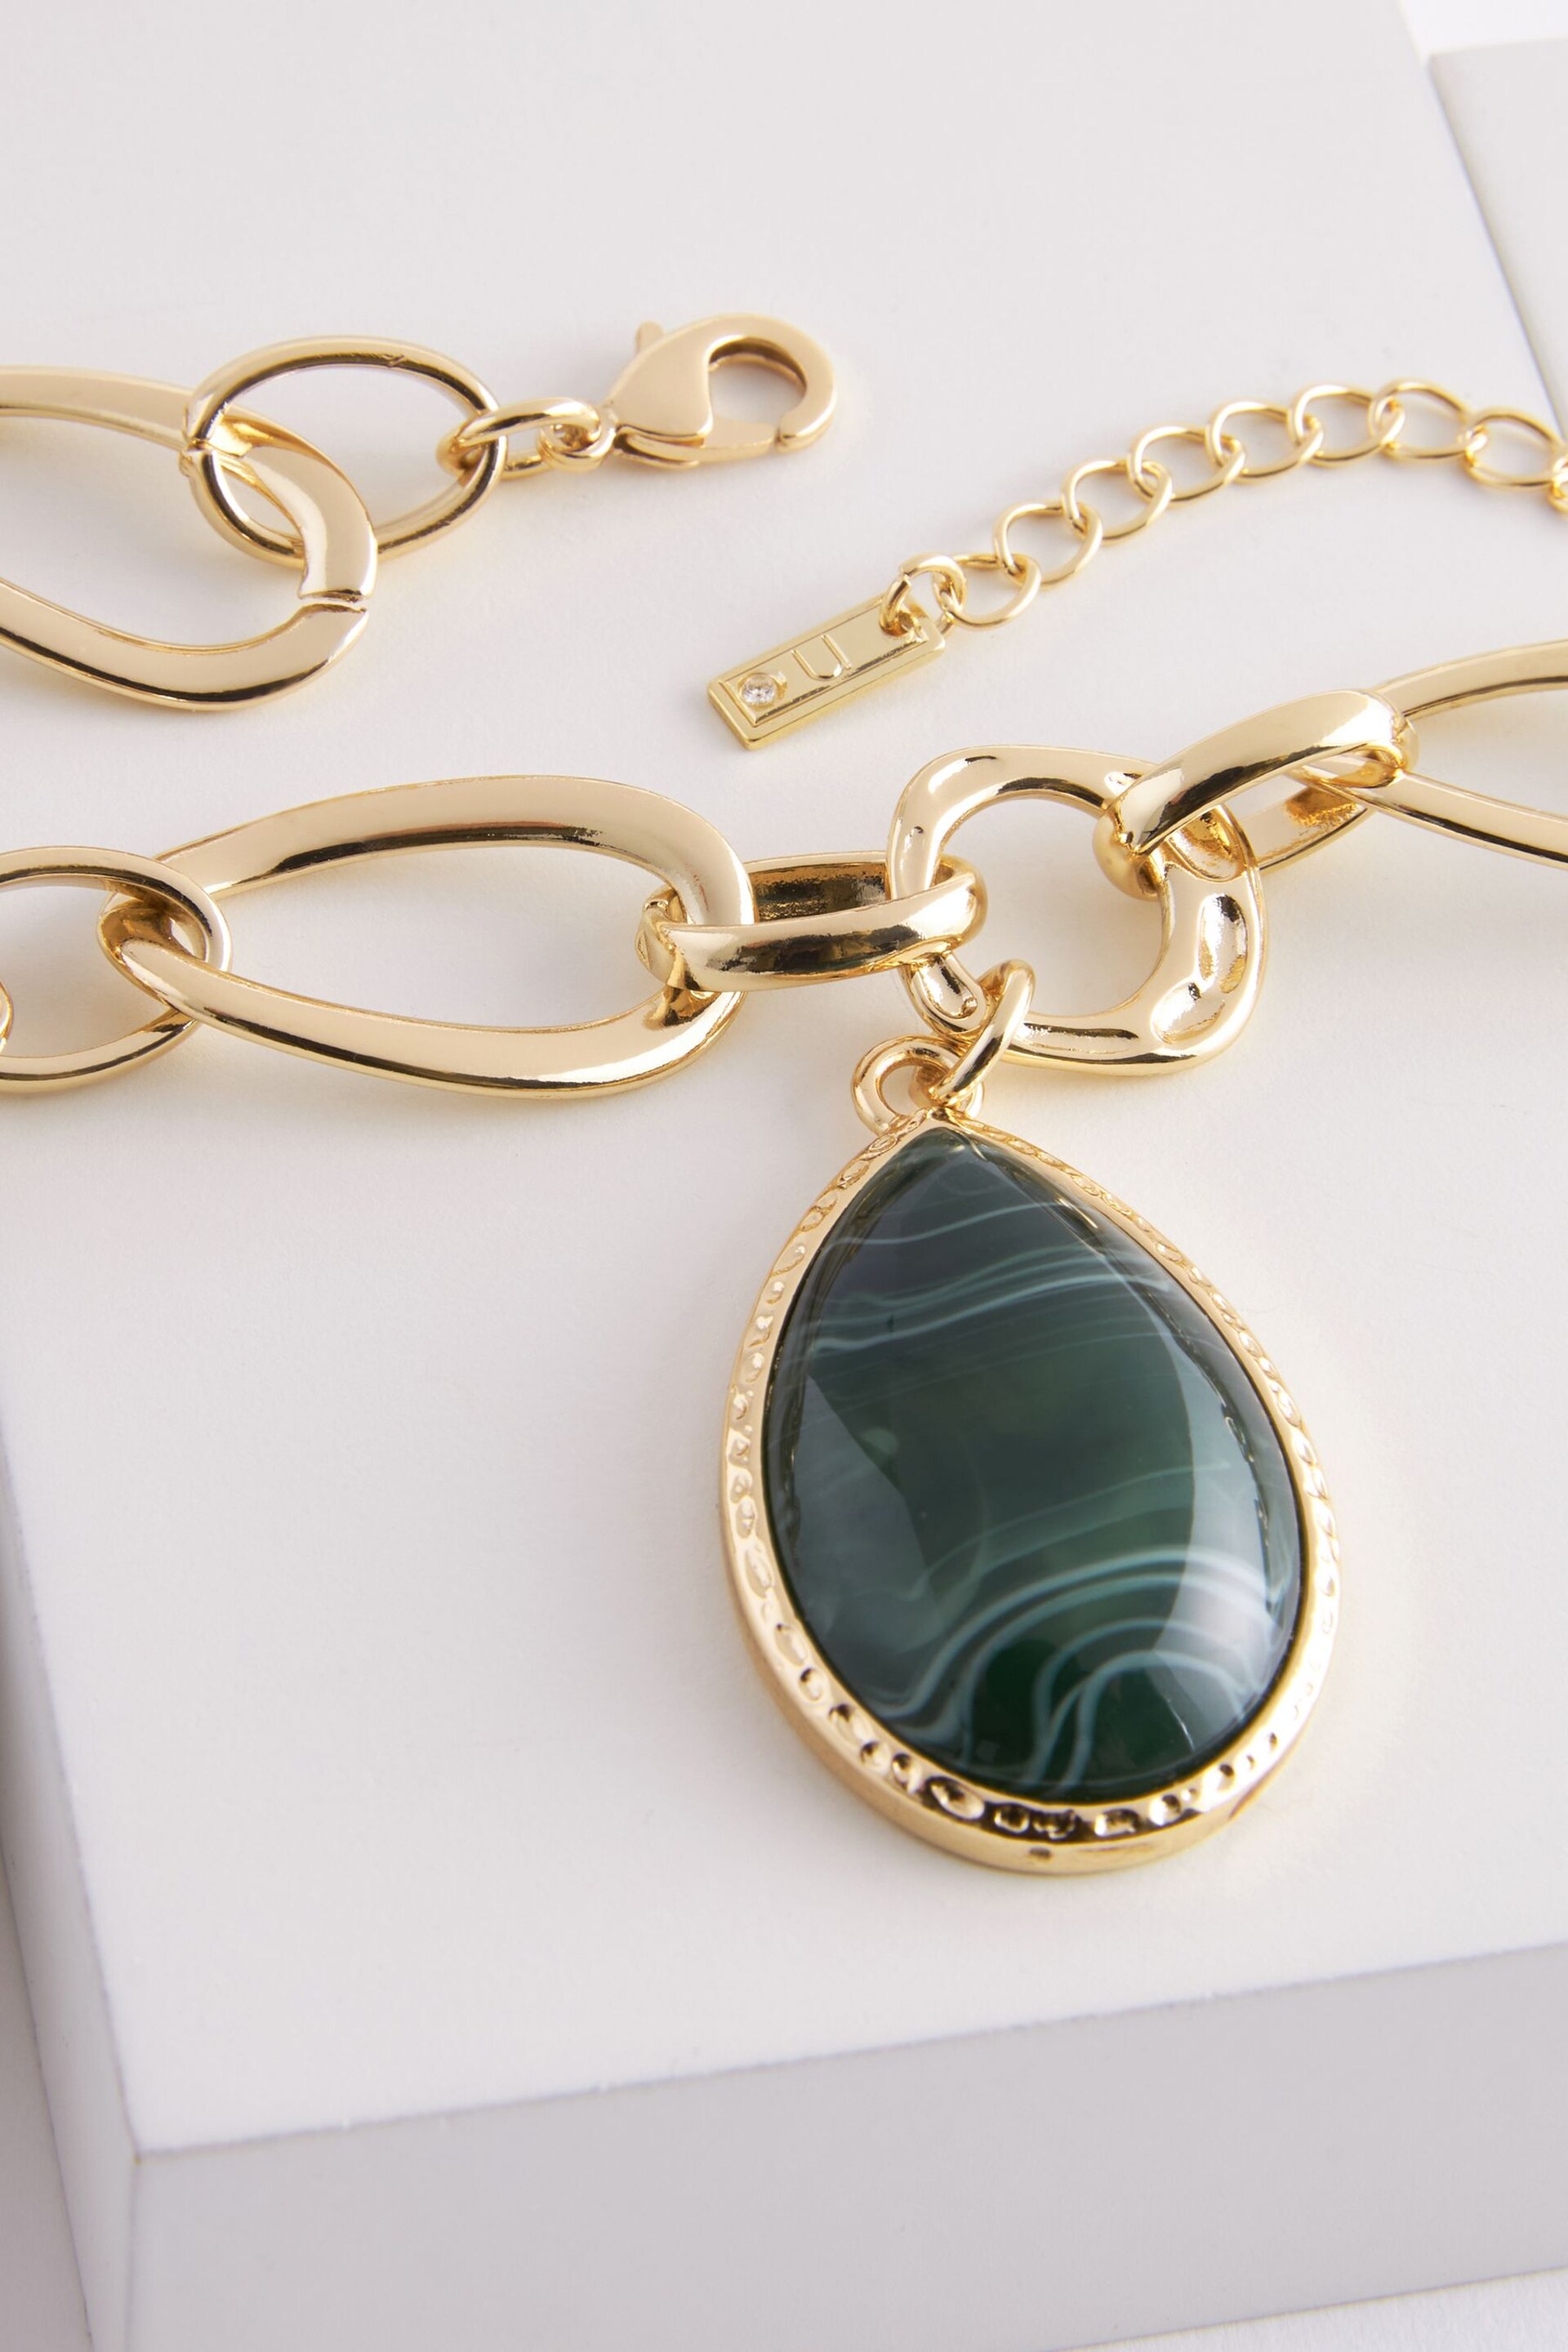 Gold Tone Chunky Chain Green Faux Stone Drop Necklace Made With Recycled Metals - Image 4 of 4